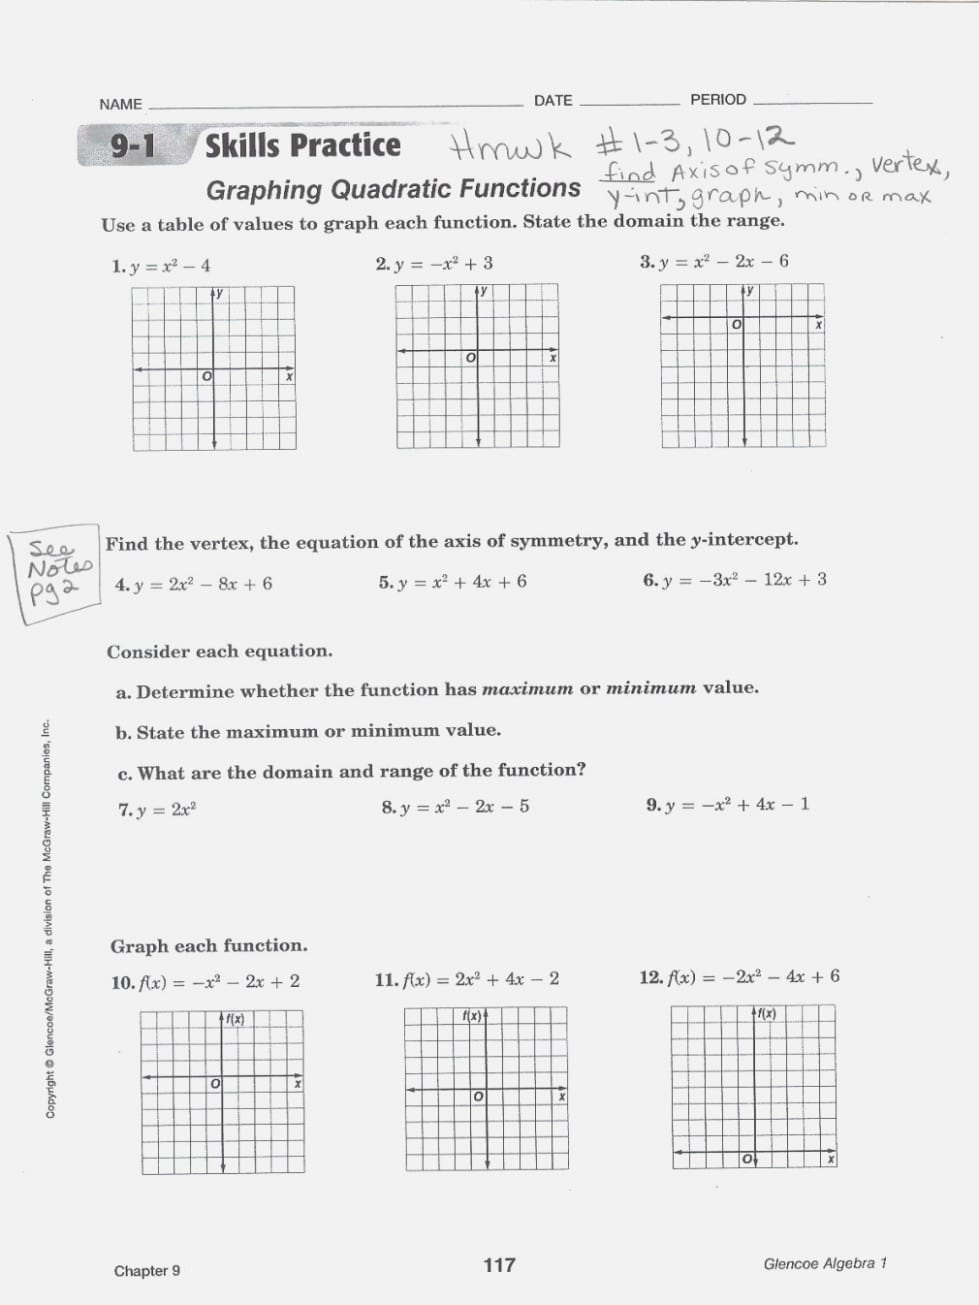 graphing-quadratics-review-worksheet-answers-db-excel